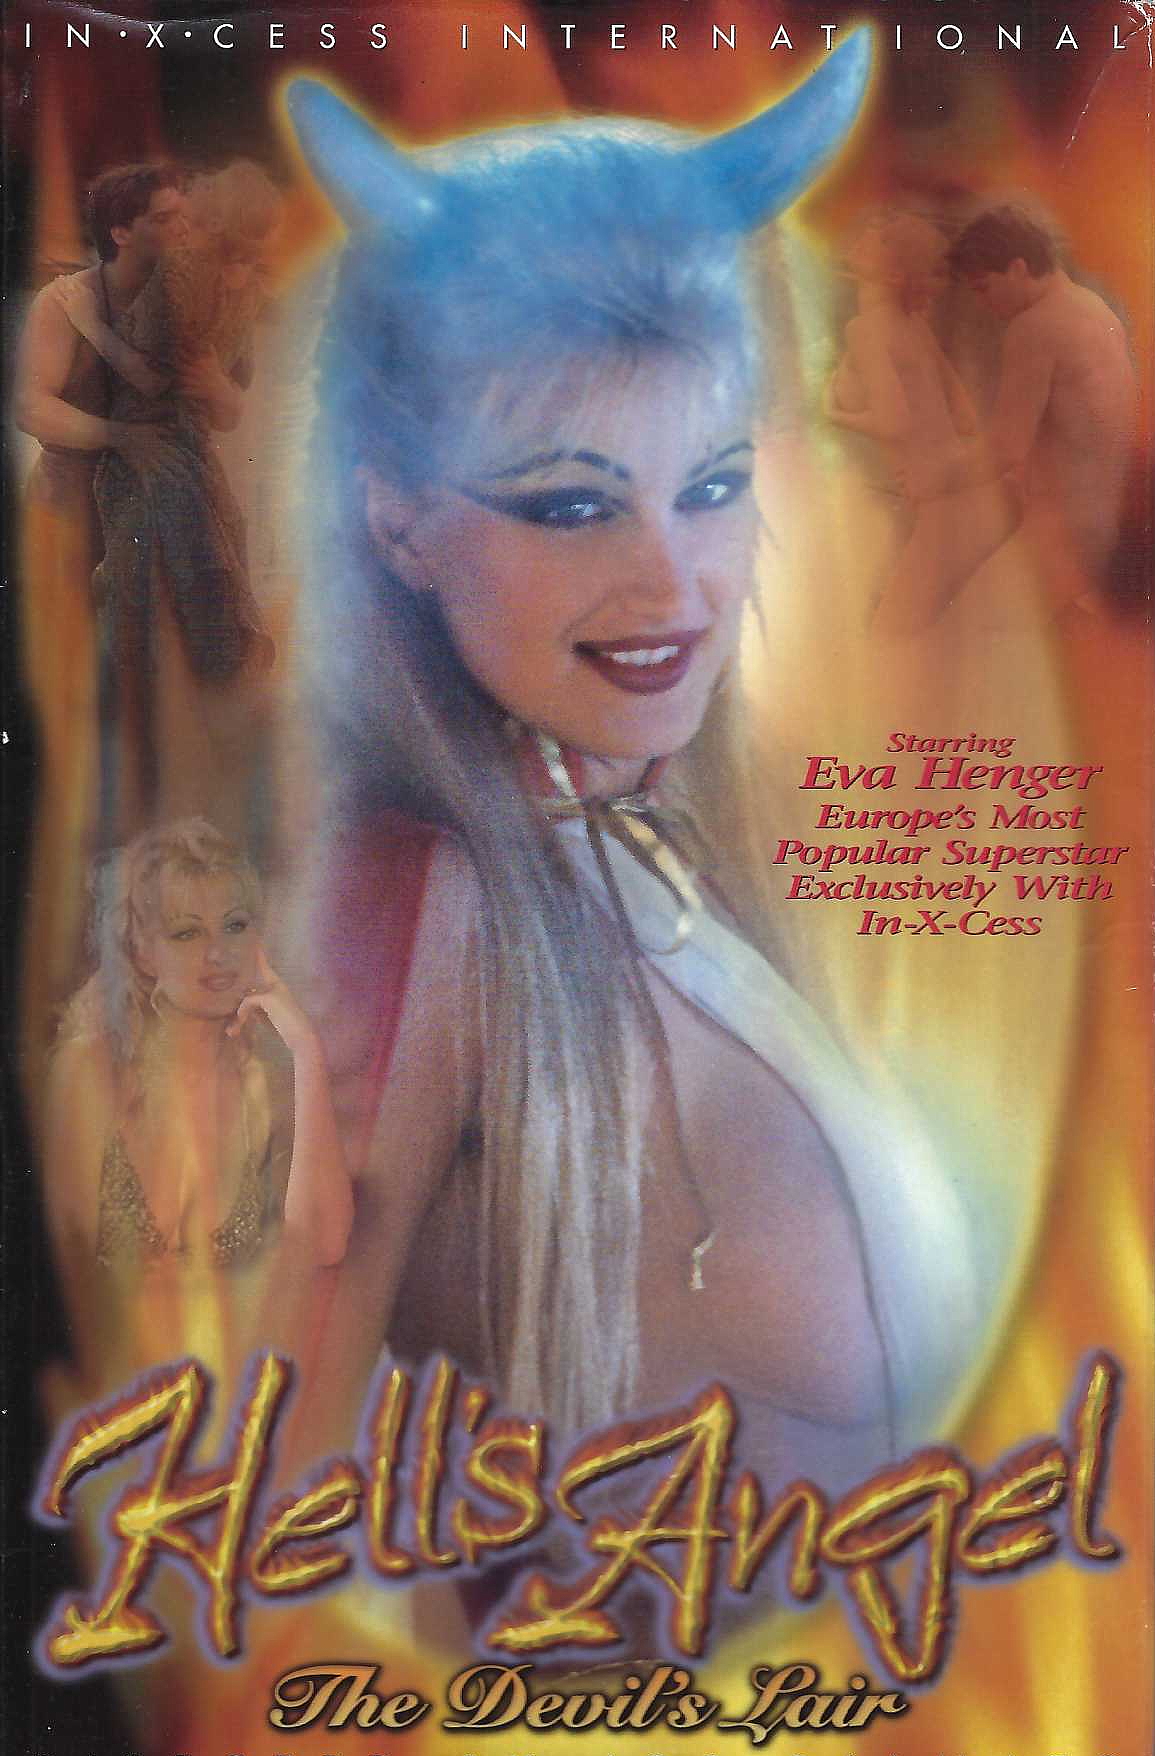 Vhs Porn Movies - VHS XXX Porno Movies, adult vhs movies for sale, vhs xxx, vhs adult video -